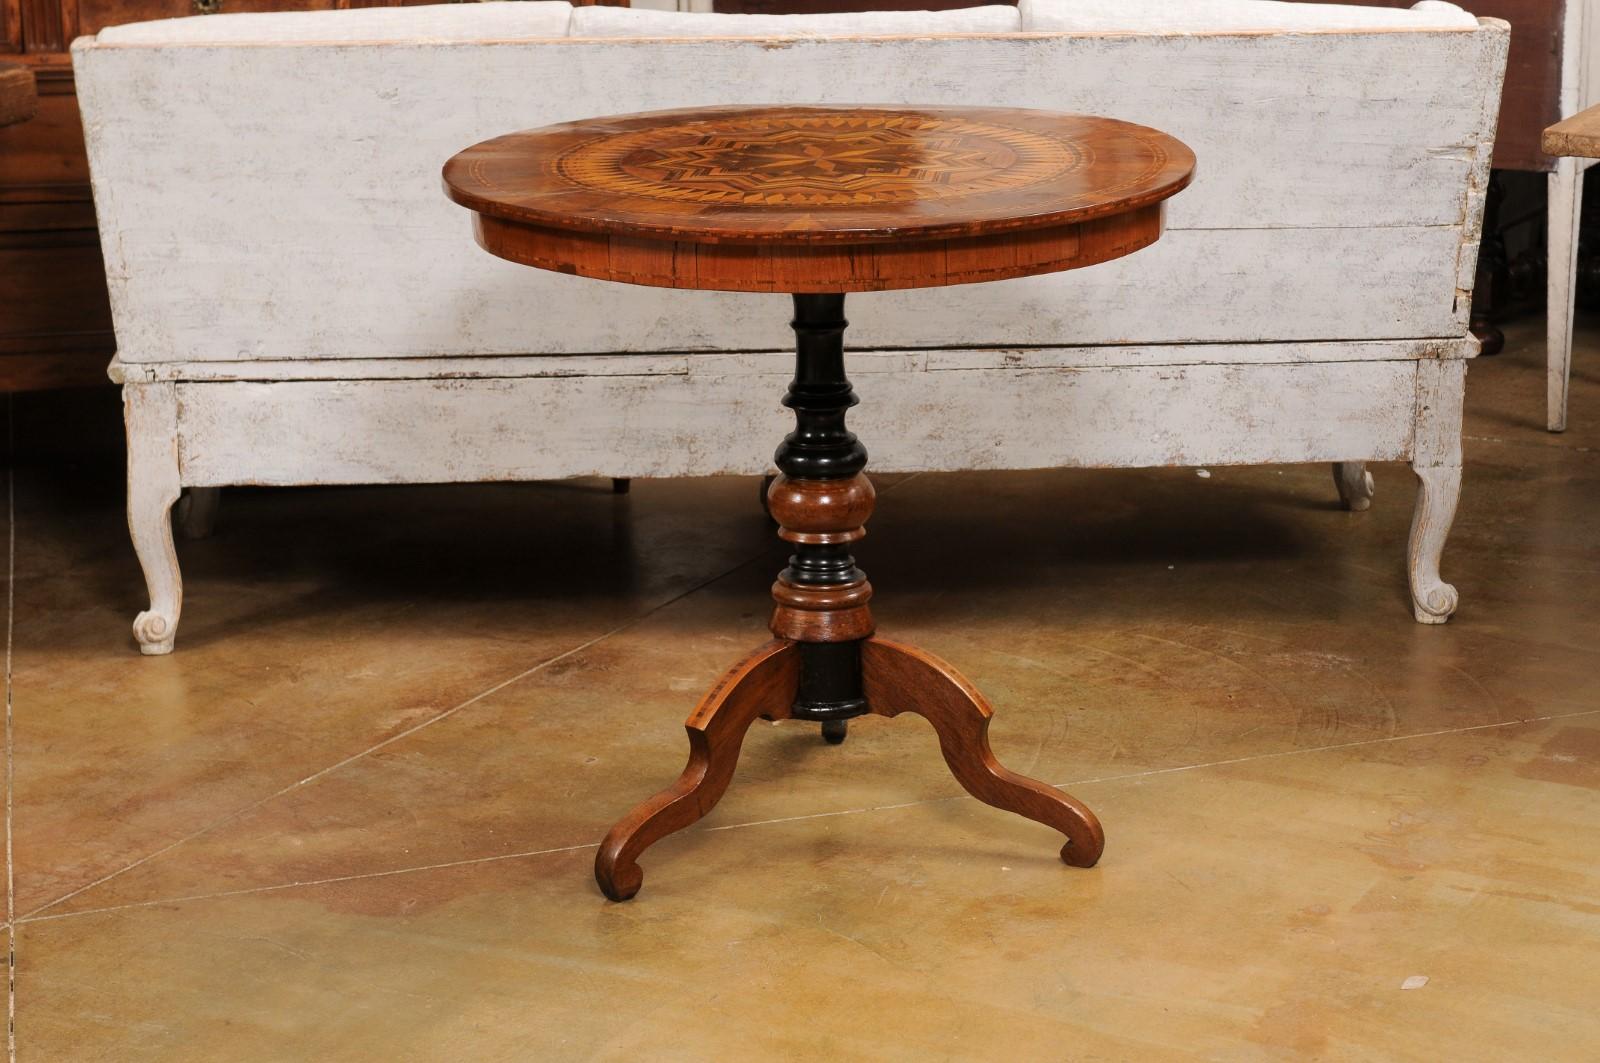 Italian 19th Century Walnut and Birch Marquetry Center Table with Tripod Base For Sale 7